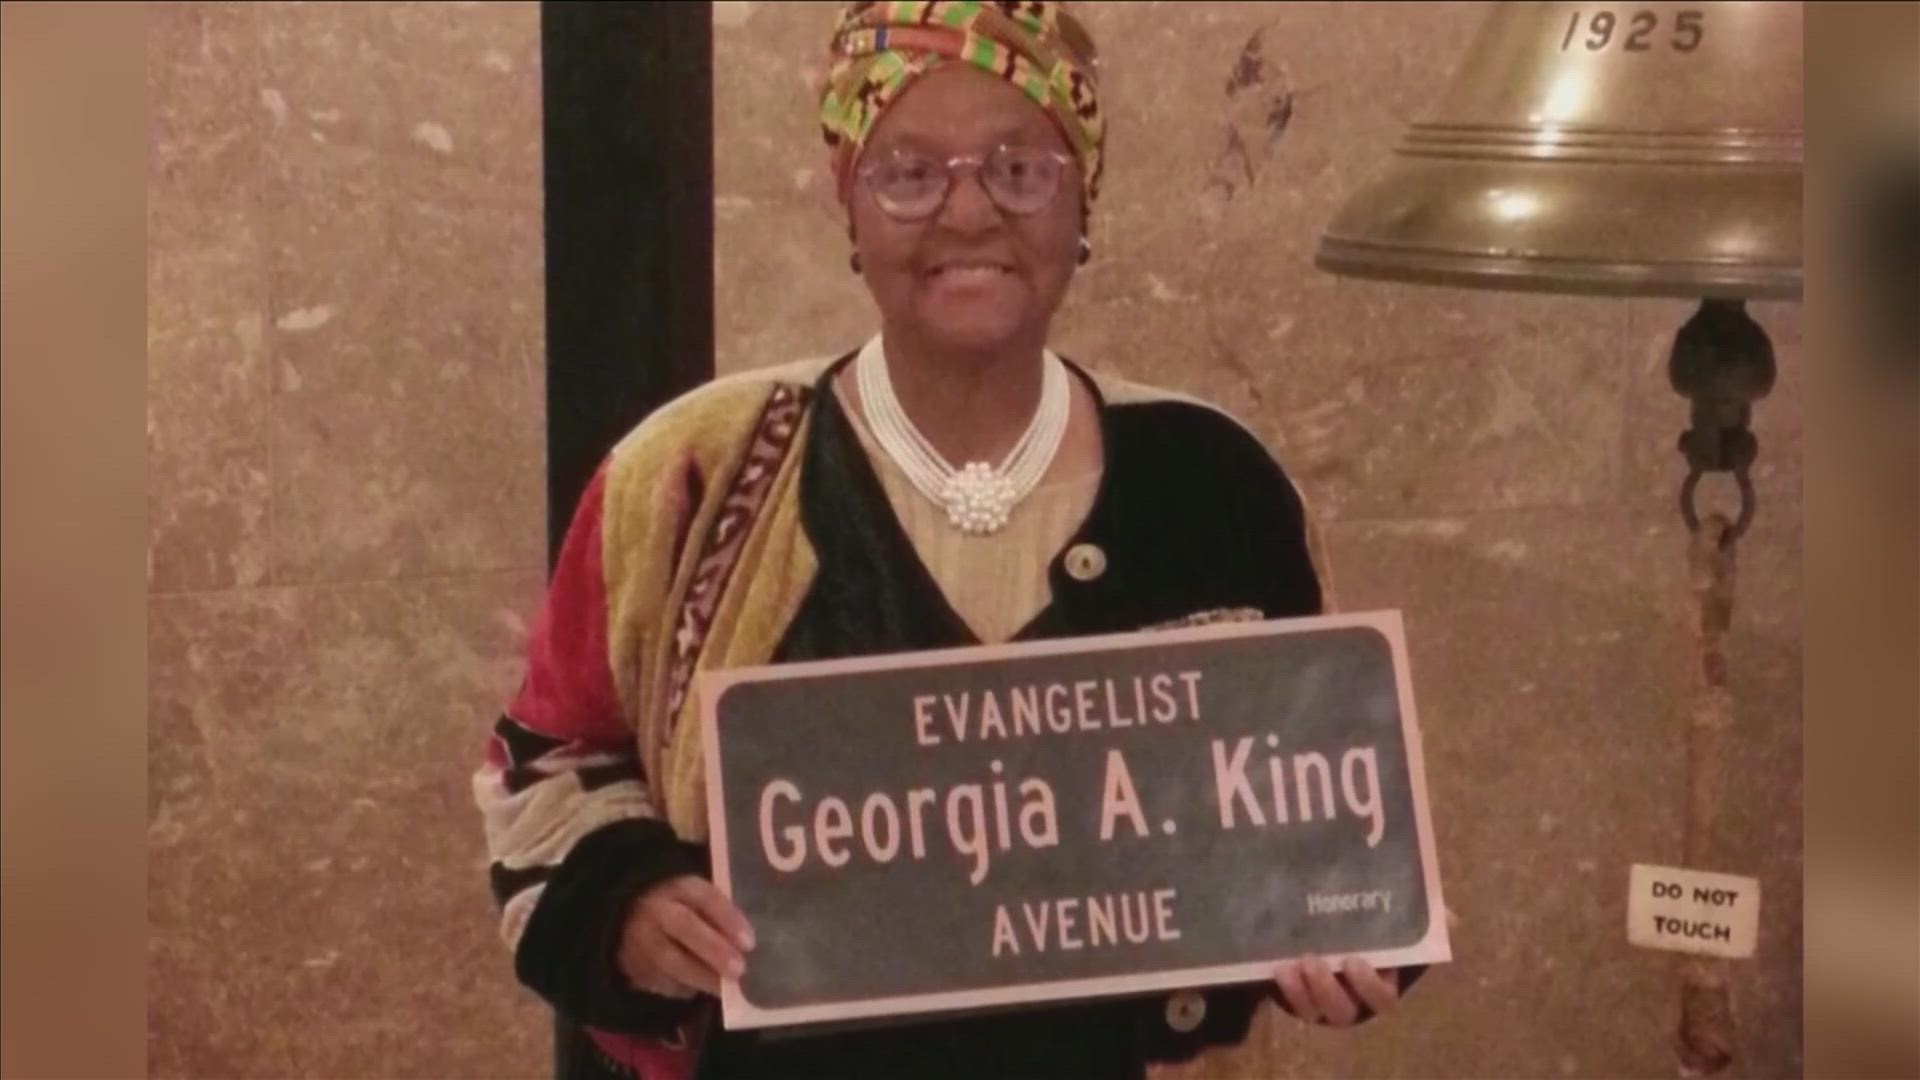 Georgia King's work poured into helping individuals with homelessness and mental health, having walked from Roanoke Virginia to the U.S. capitol among many marches.